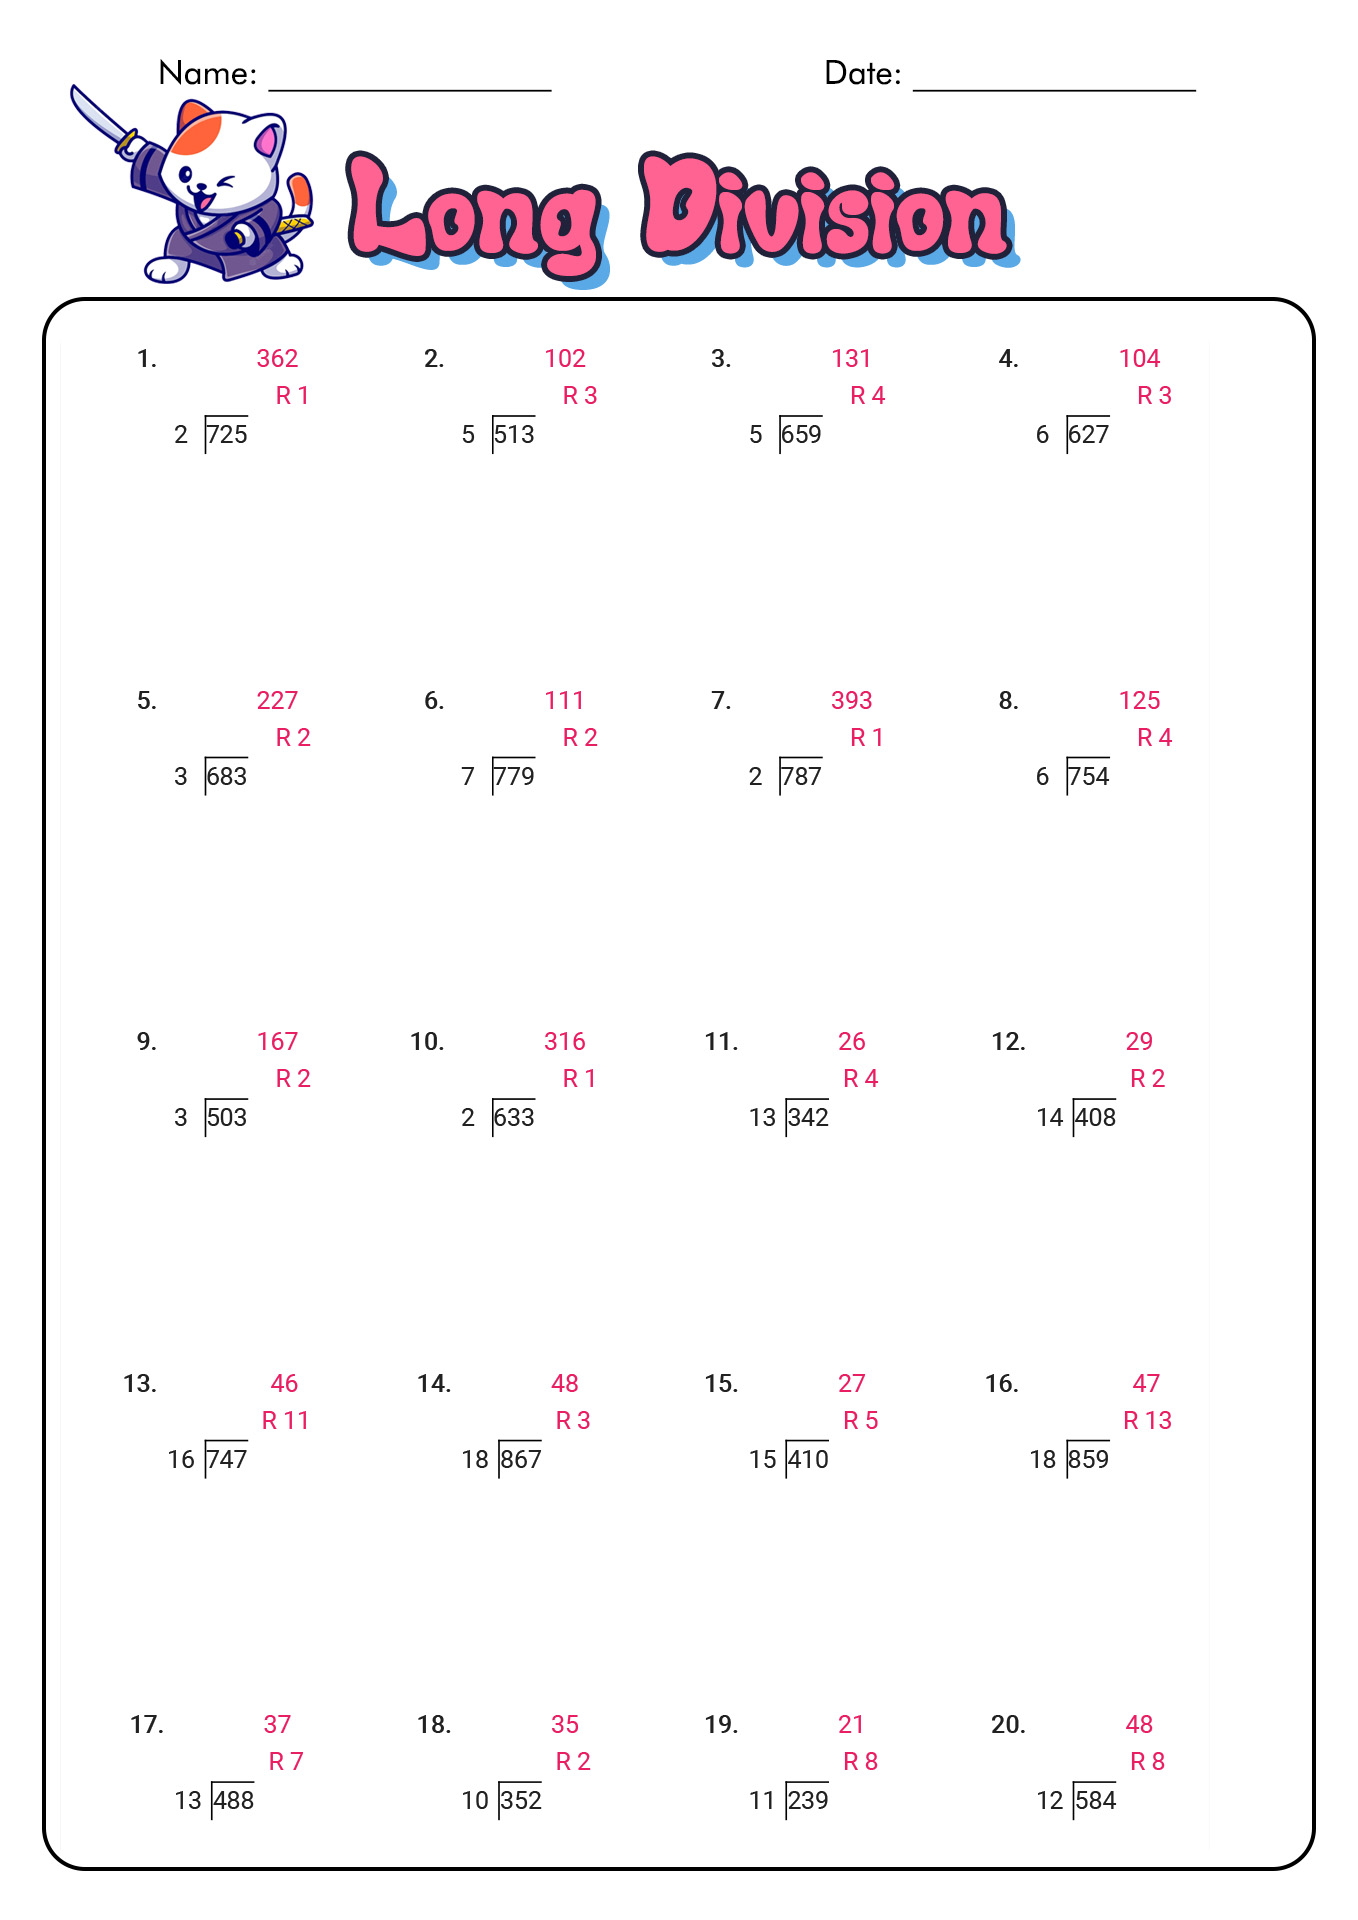 Long Division Worksheets with Answers Image